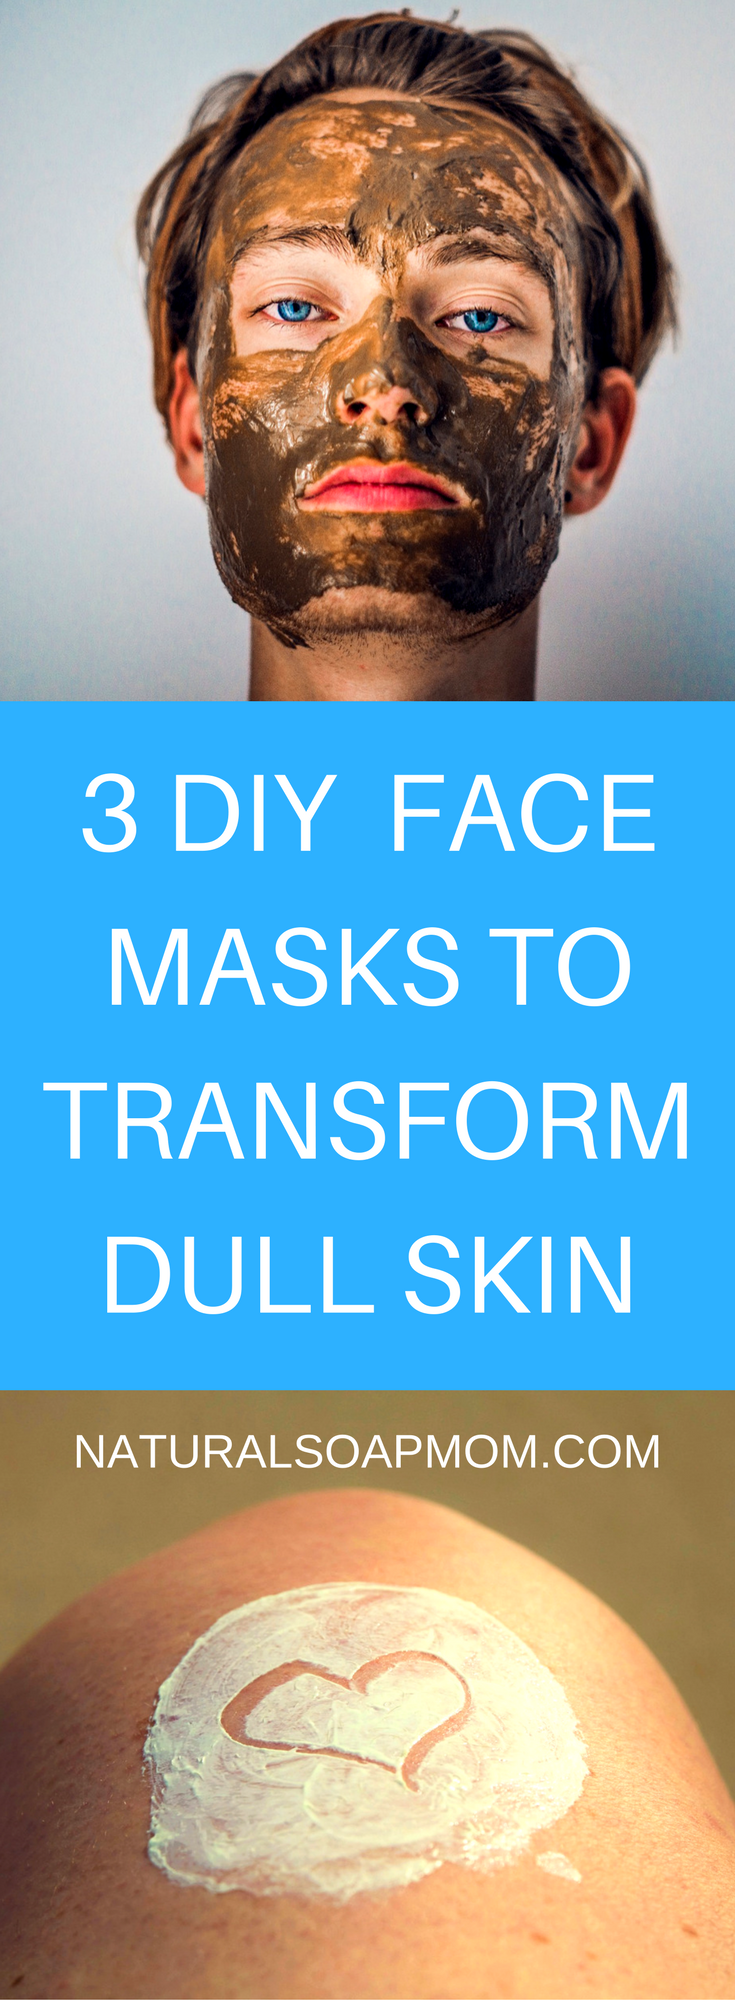 Has your skin gone from glowing - to dull and lifeless? The harsh months of winter take a toll on your skin. Bring the glow back to your skin with these 3 DIY Face Masks. They work great and are simple to whip up!